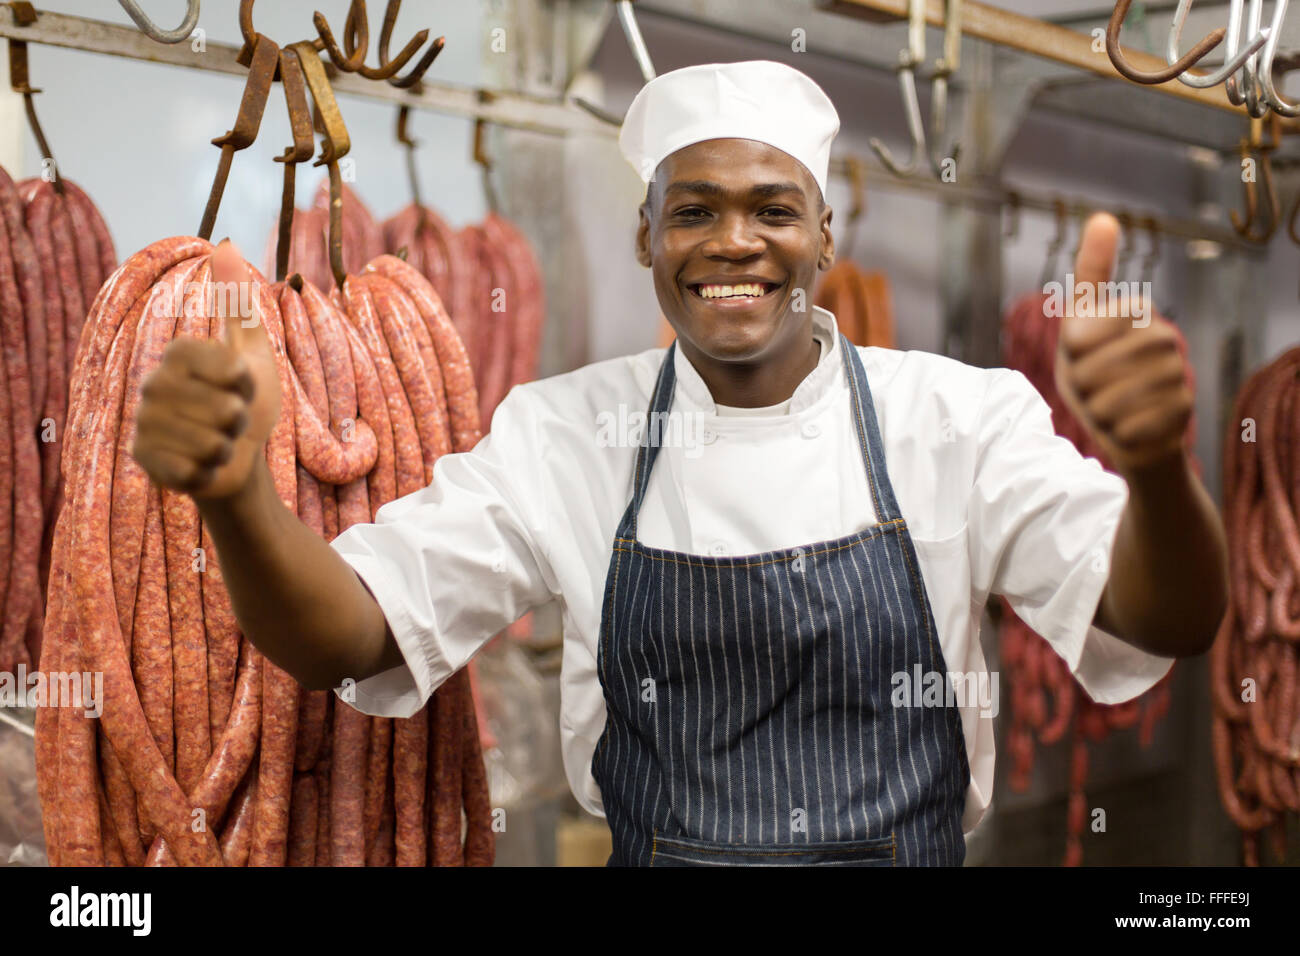 Cheerful young African American butcher Thumbs up en chambre froide Banque D'Images